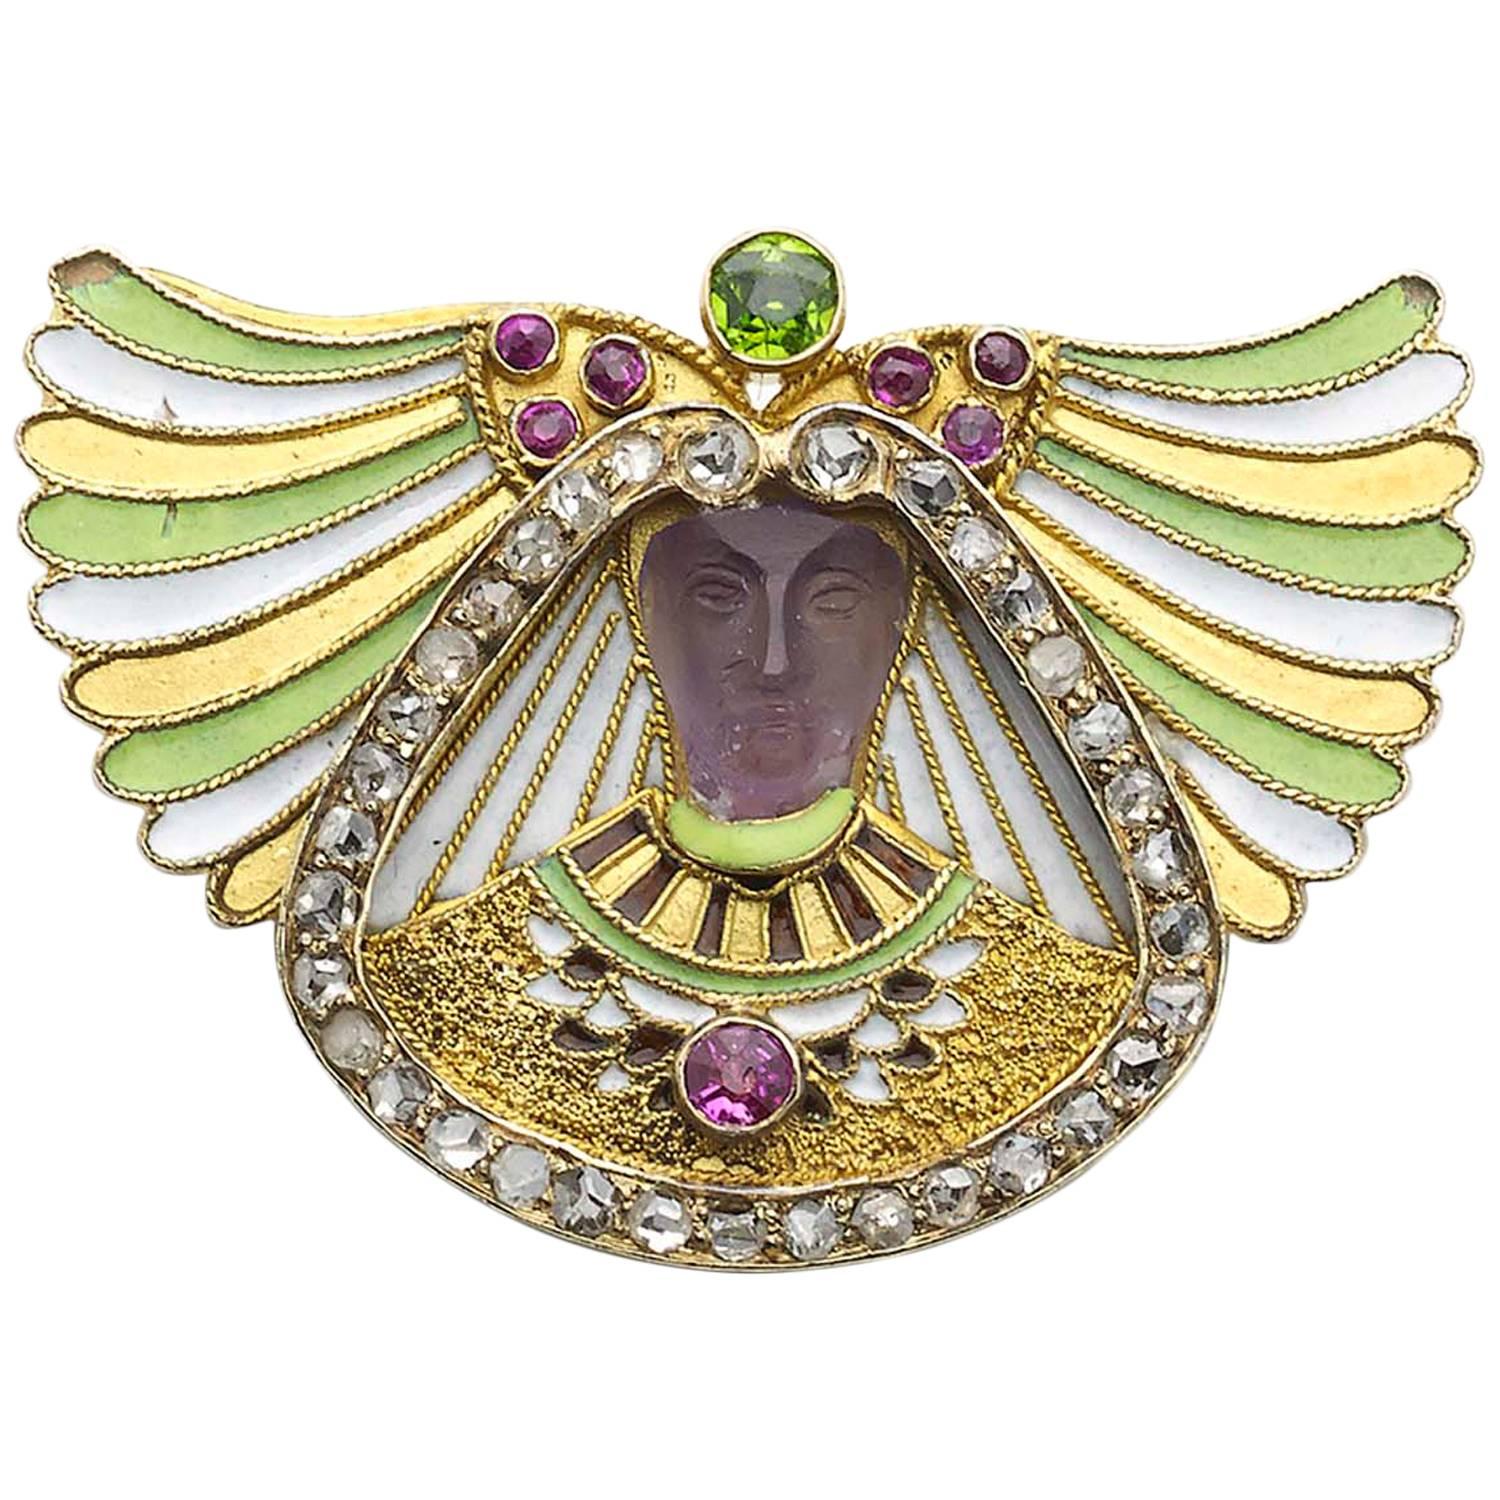 Egyptian Revival Carved Amethyst and Gem-Set Brooch, Austria-Hungary, Circa 1880